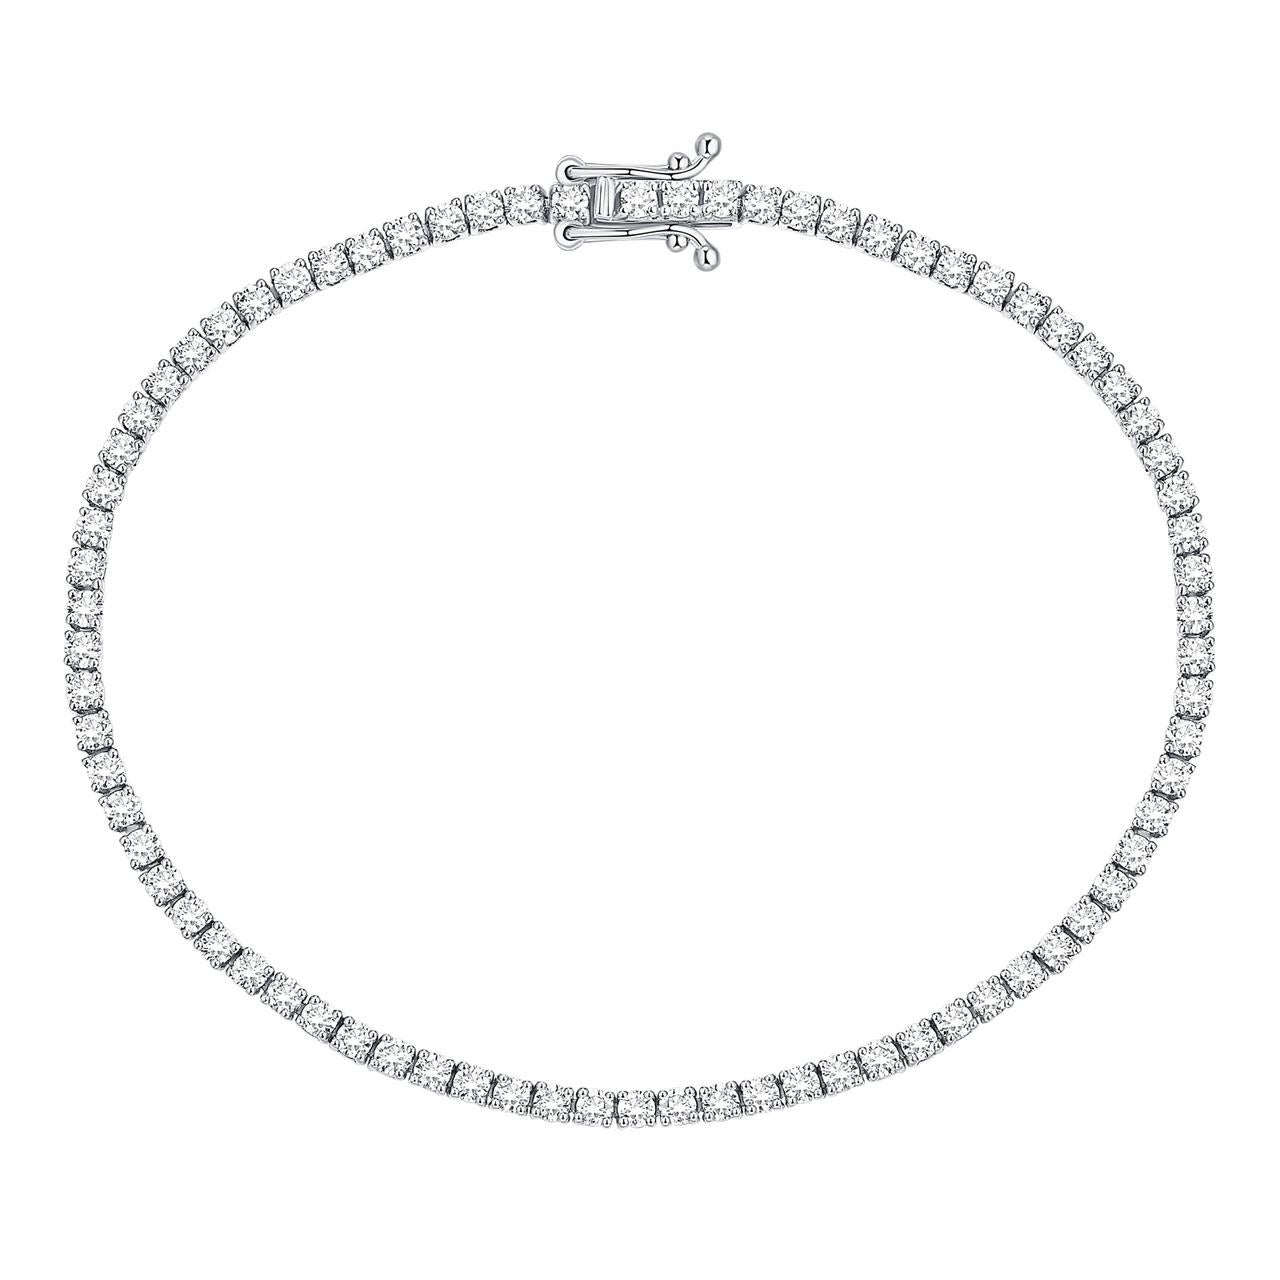 An amazing Diamond Tennis Bracelet set with 80 Round-Cut Diamonds weighing 1,60 carats.
The Tennis Bracelet length is 18Cm (7inch) and the diamonds are F/G VS quality
The Diamond Bracelet is available in 18K White Gold, 18K Rose Gold and 18K Yellow